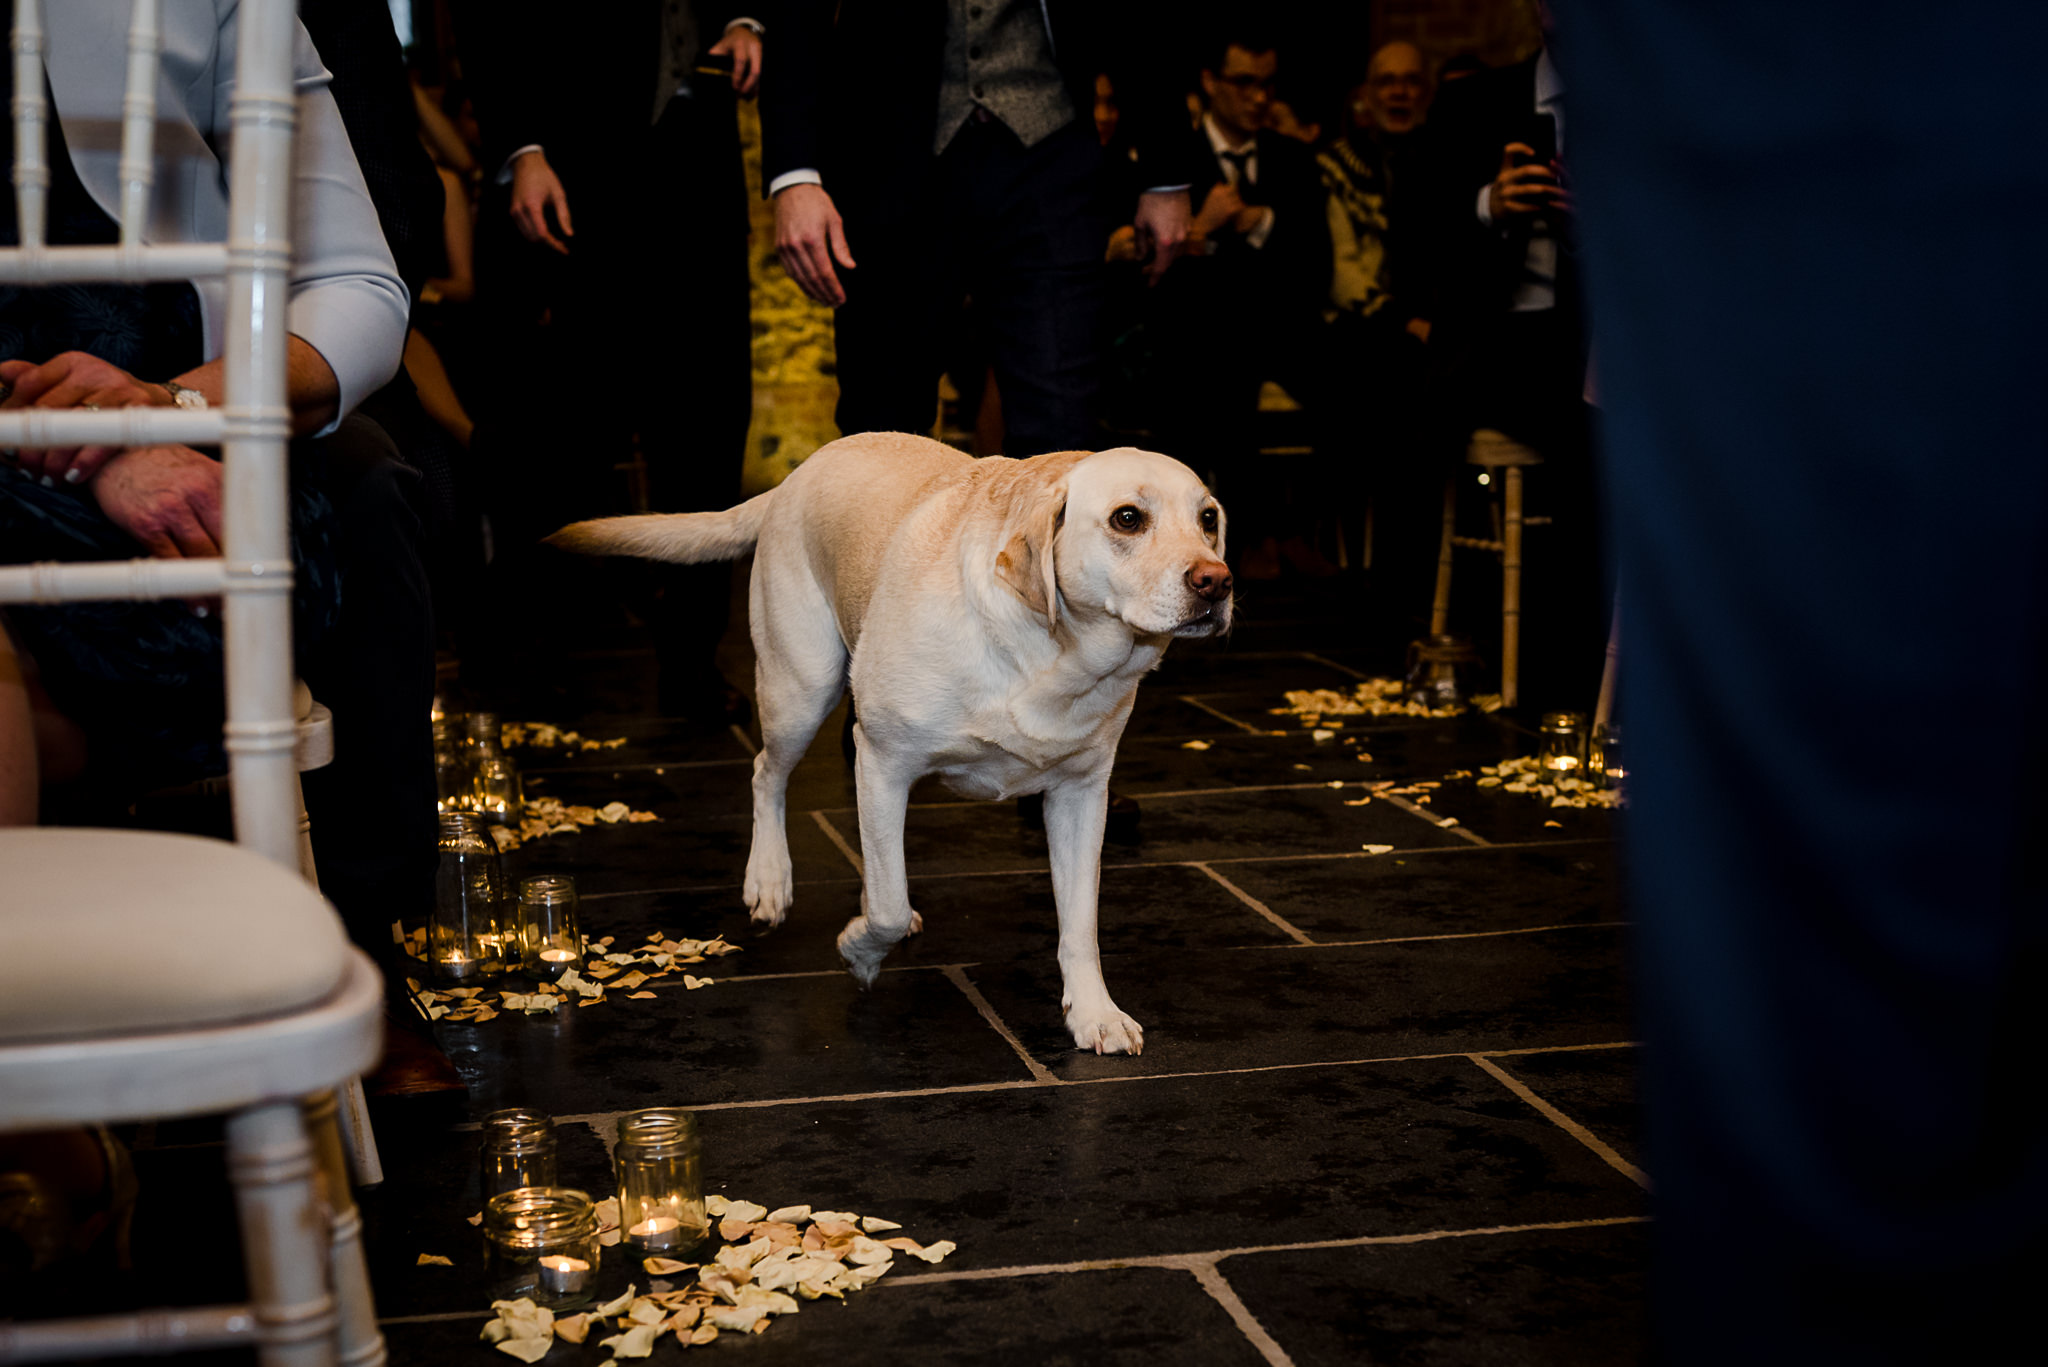 Dogs at weddings - Walking down the aisle